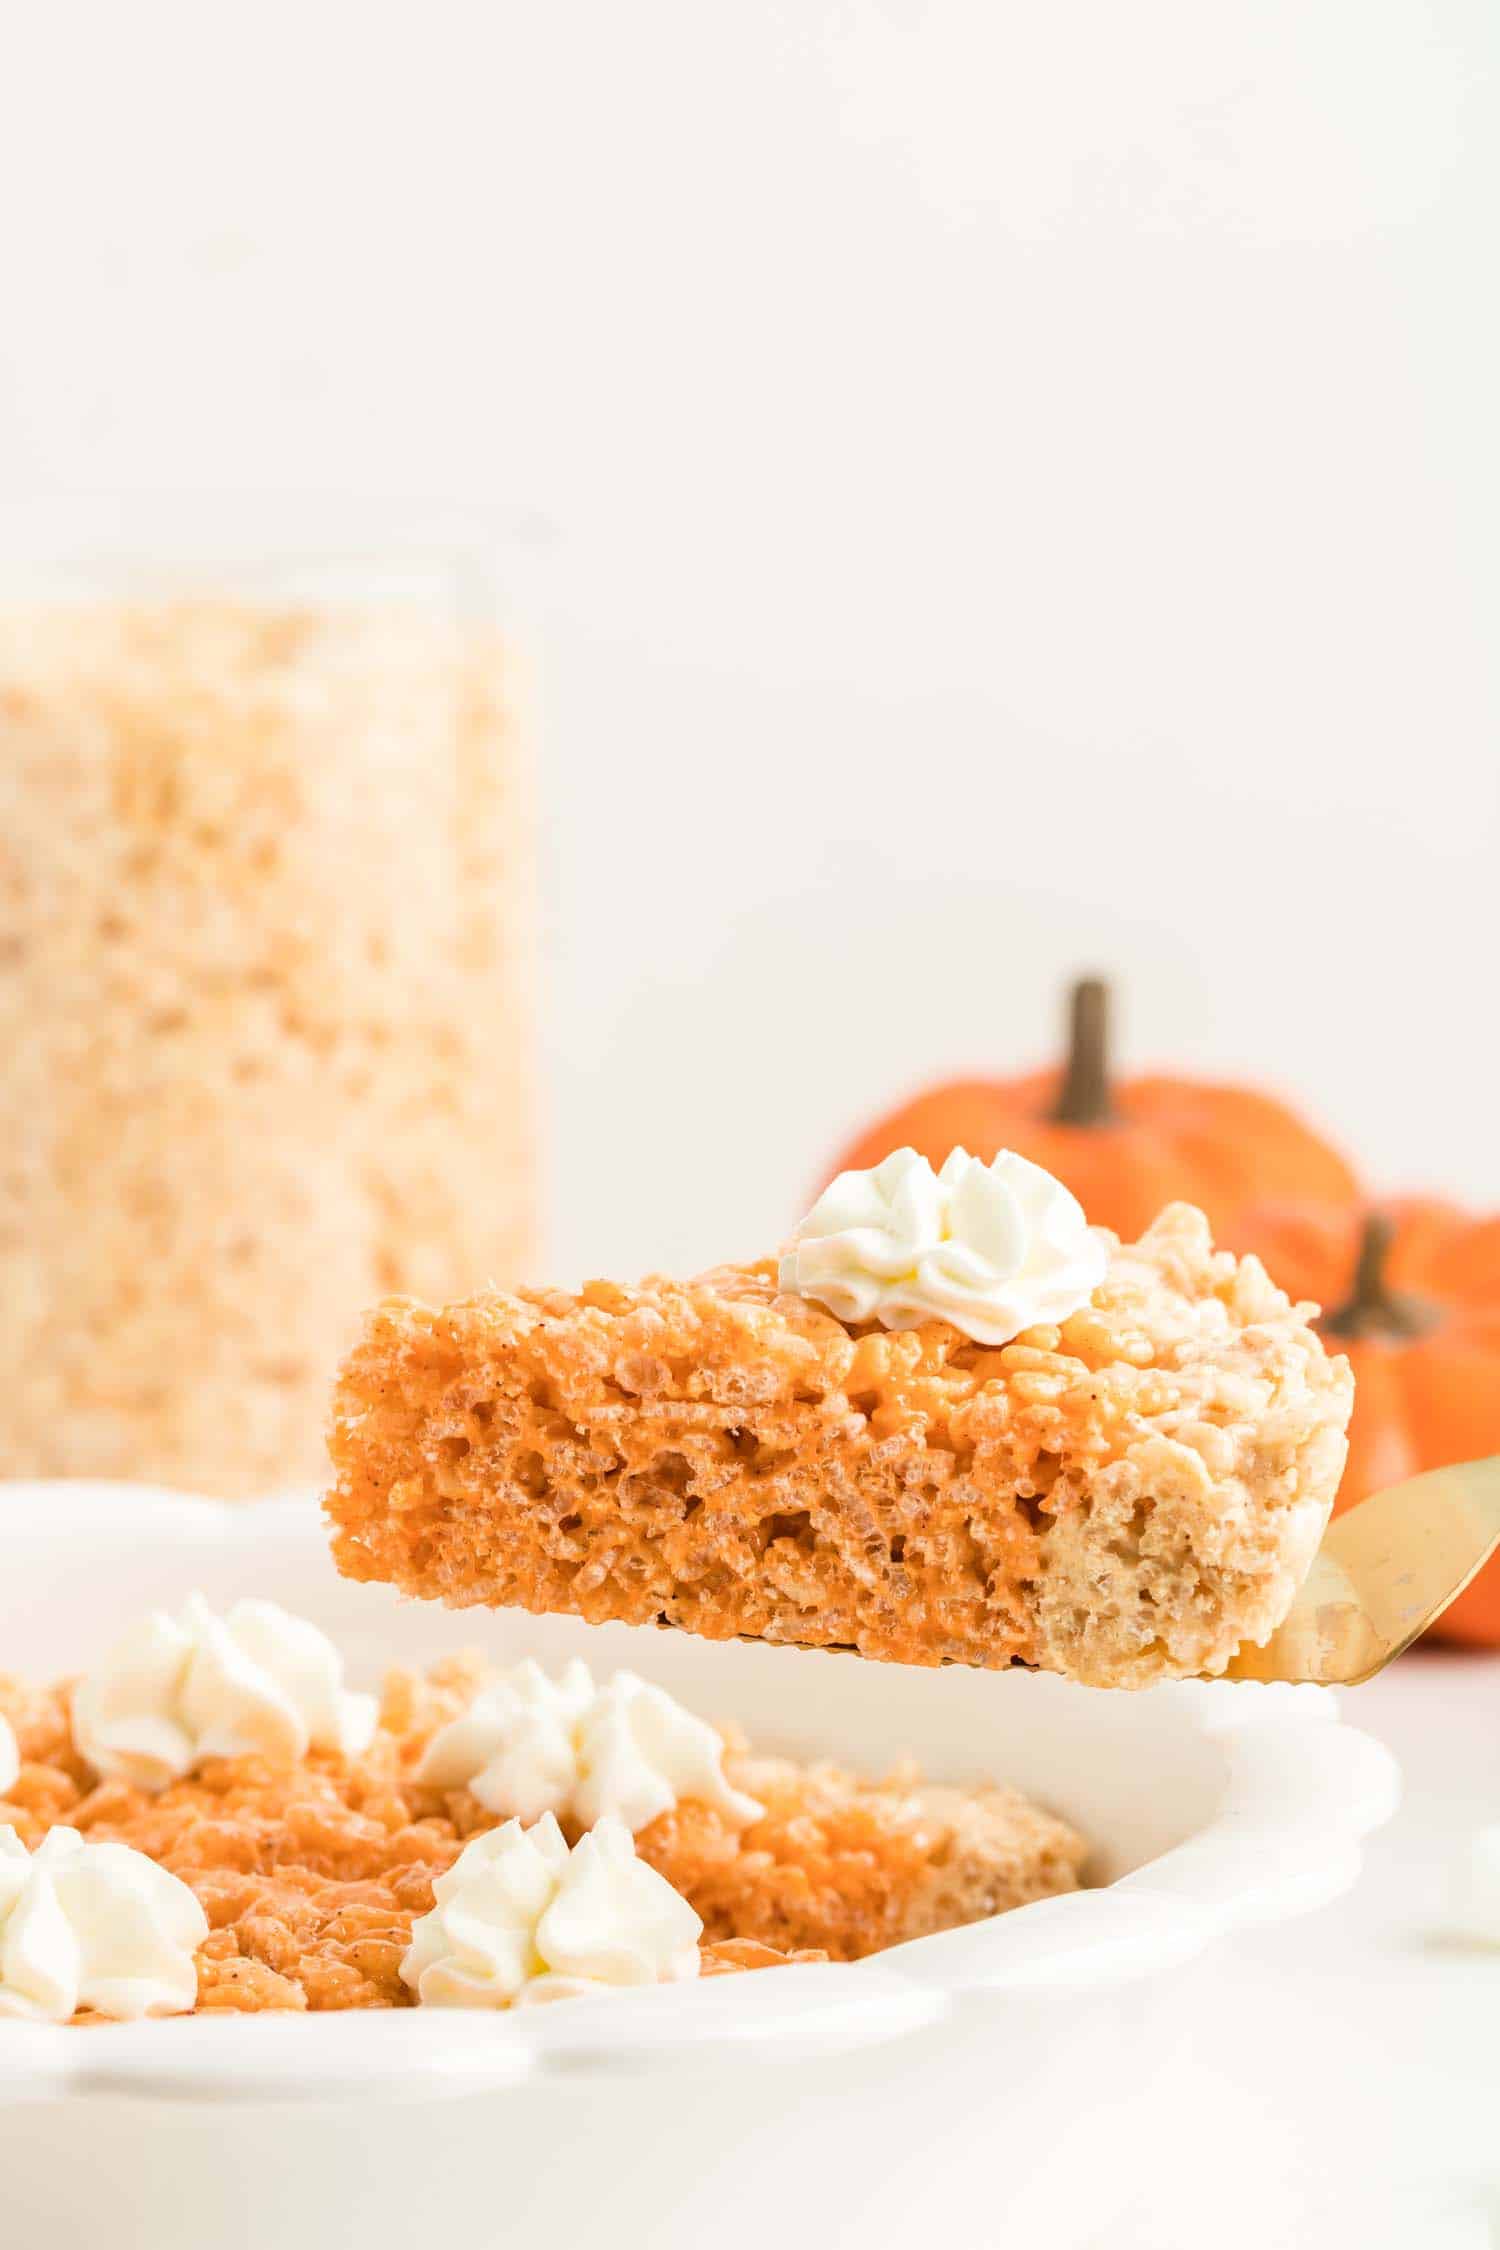 Side View of Pumpkin Pie Krispie Treat on Fork lifted from White Dish